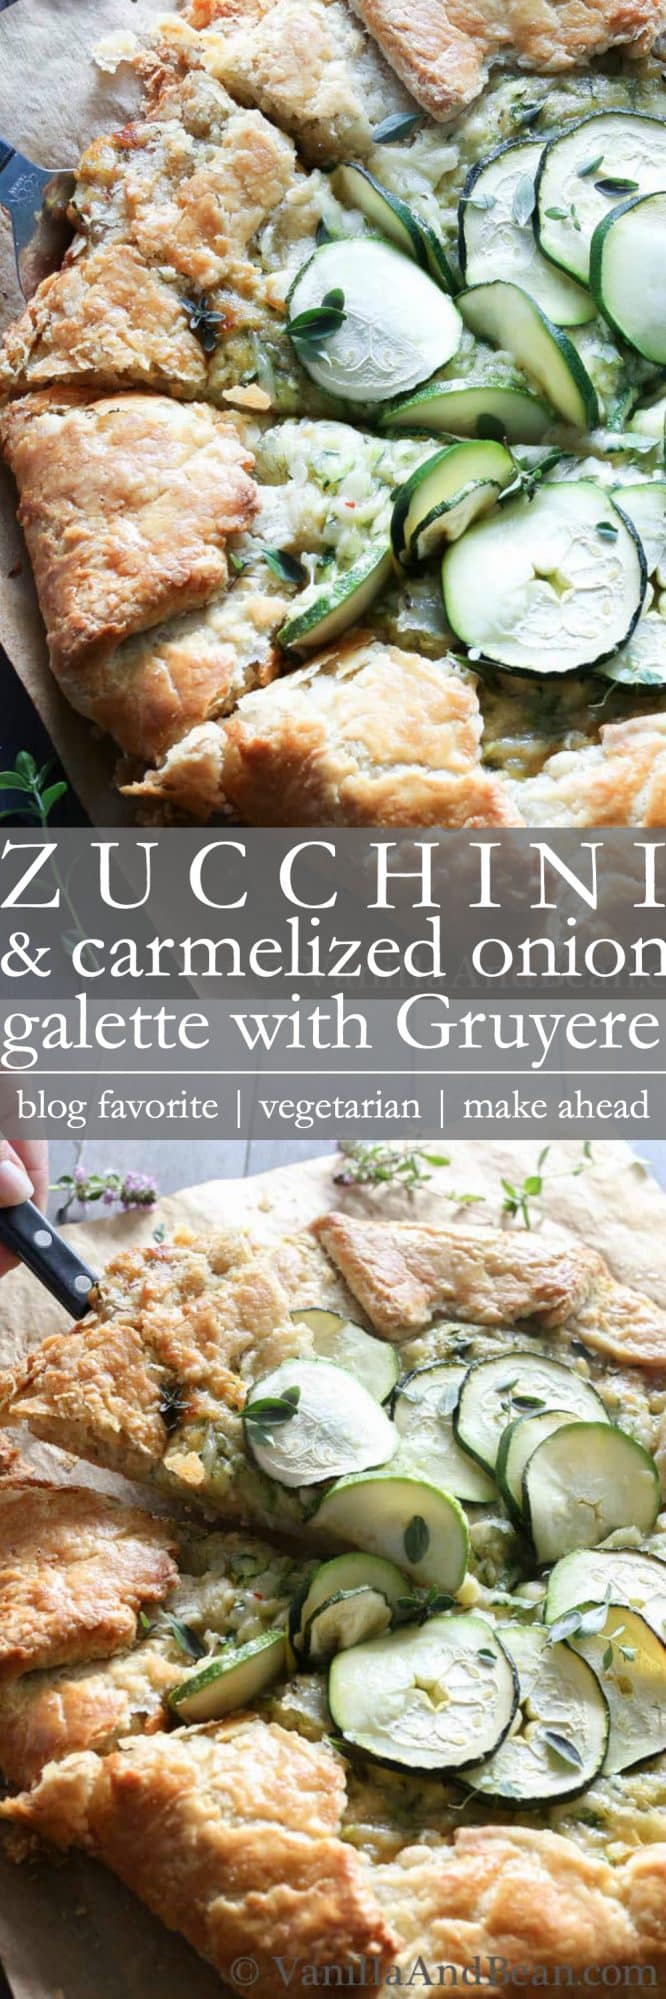 Zucchini and Caramelized Onion Galette with Gruyere